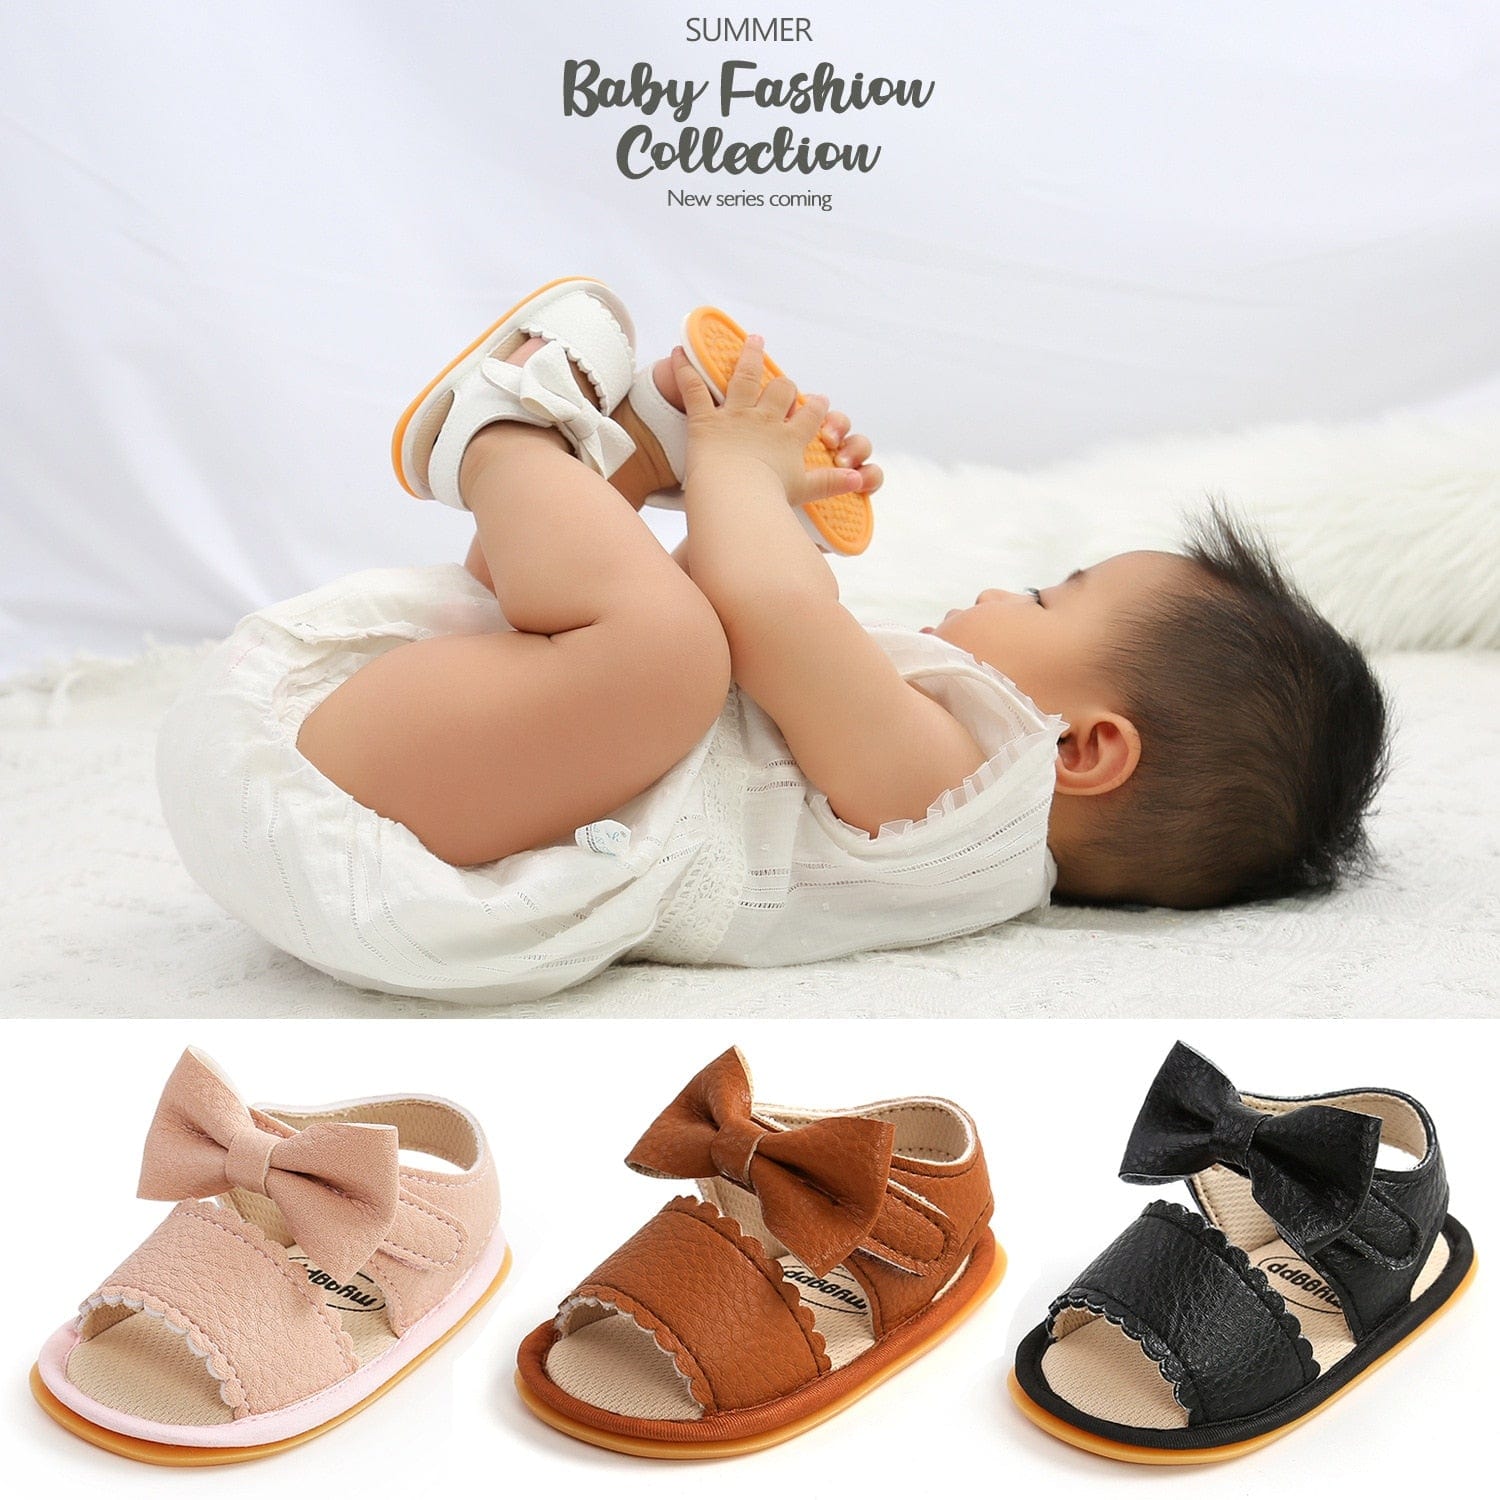 Proactive Baby Baby Footwear LoveBaby Summer Breathable Shoes for Baby Girl-Soft Rubber, Sole Anti-Slip & Bowknot